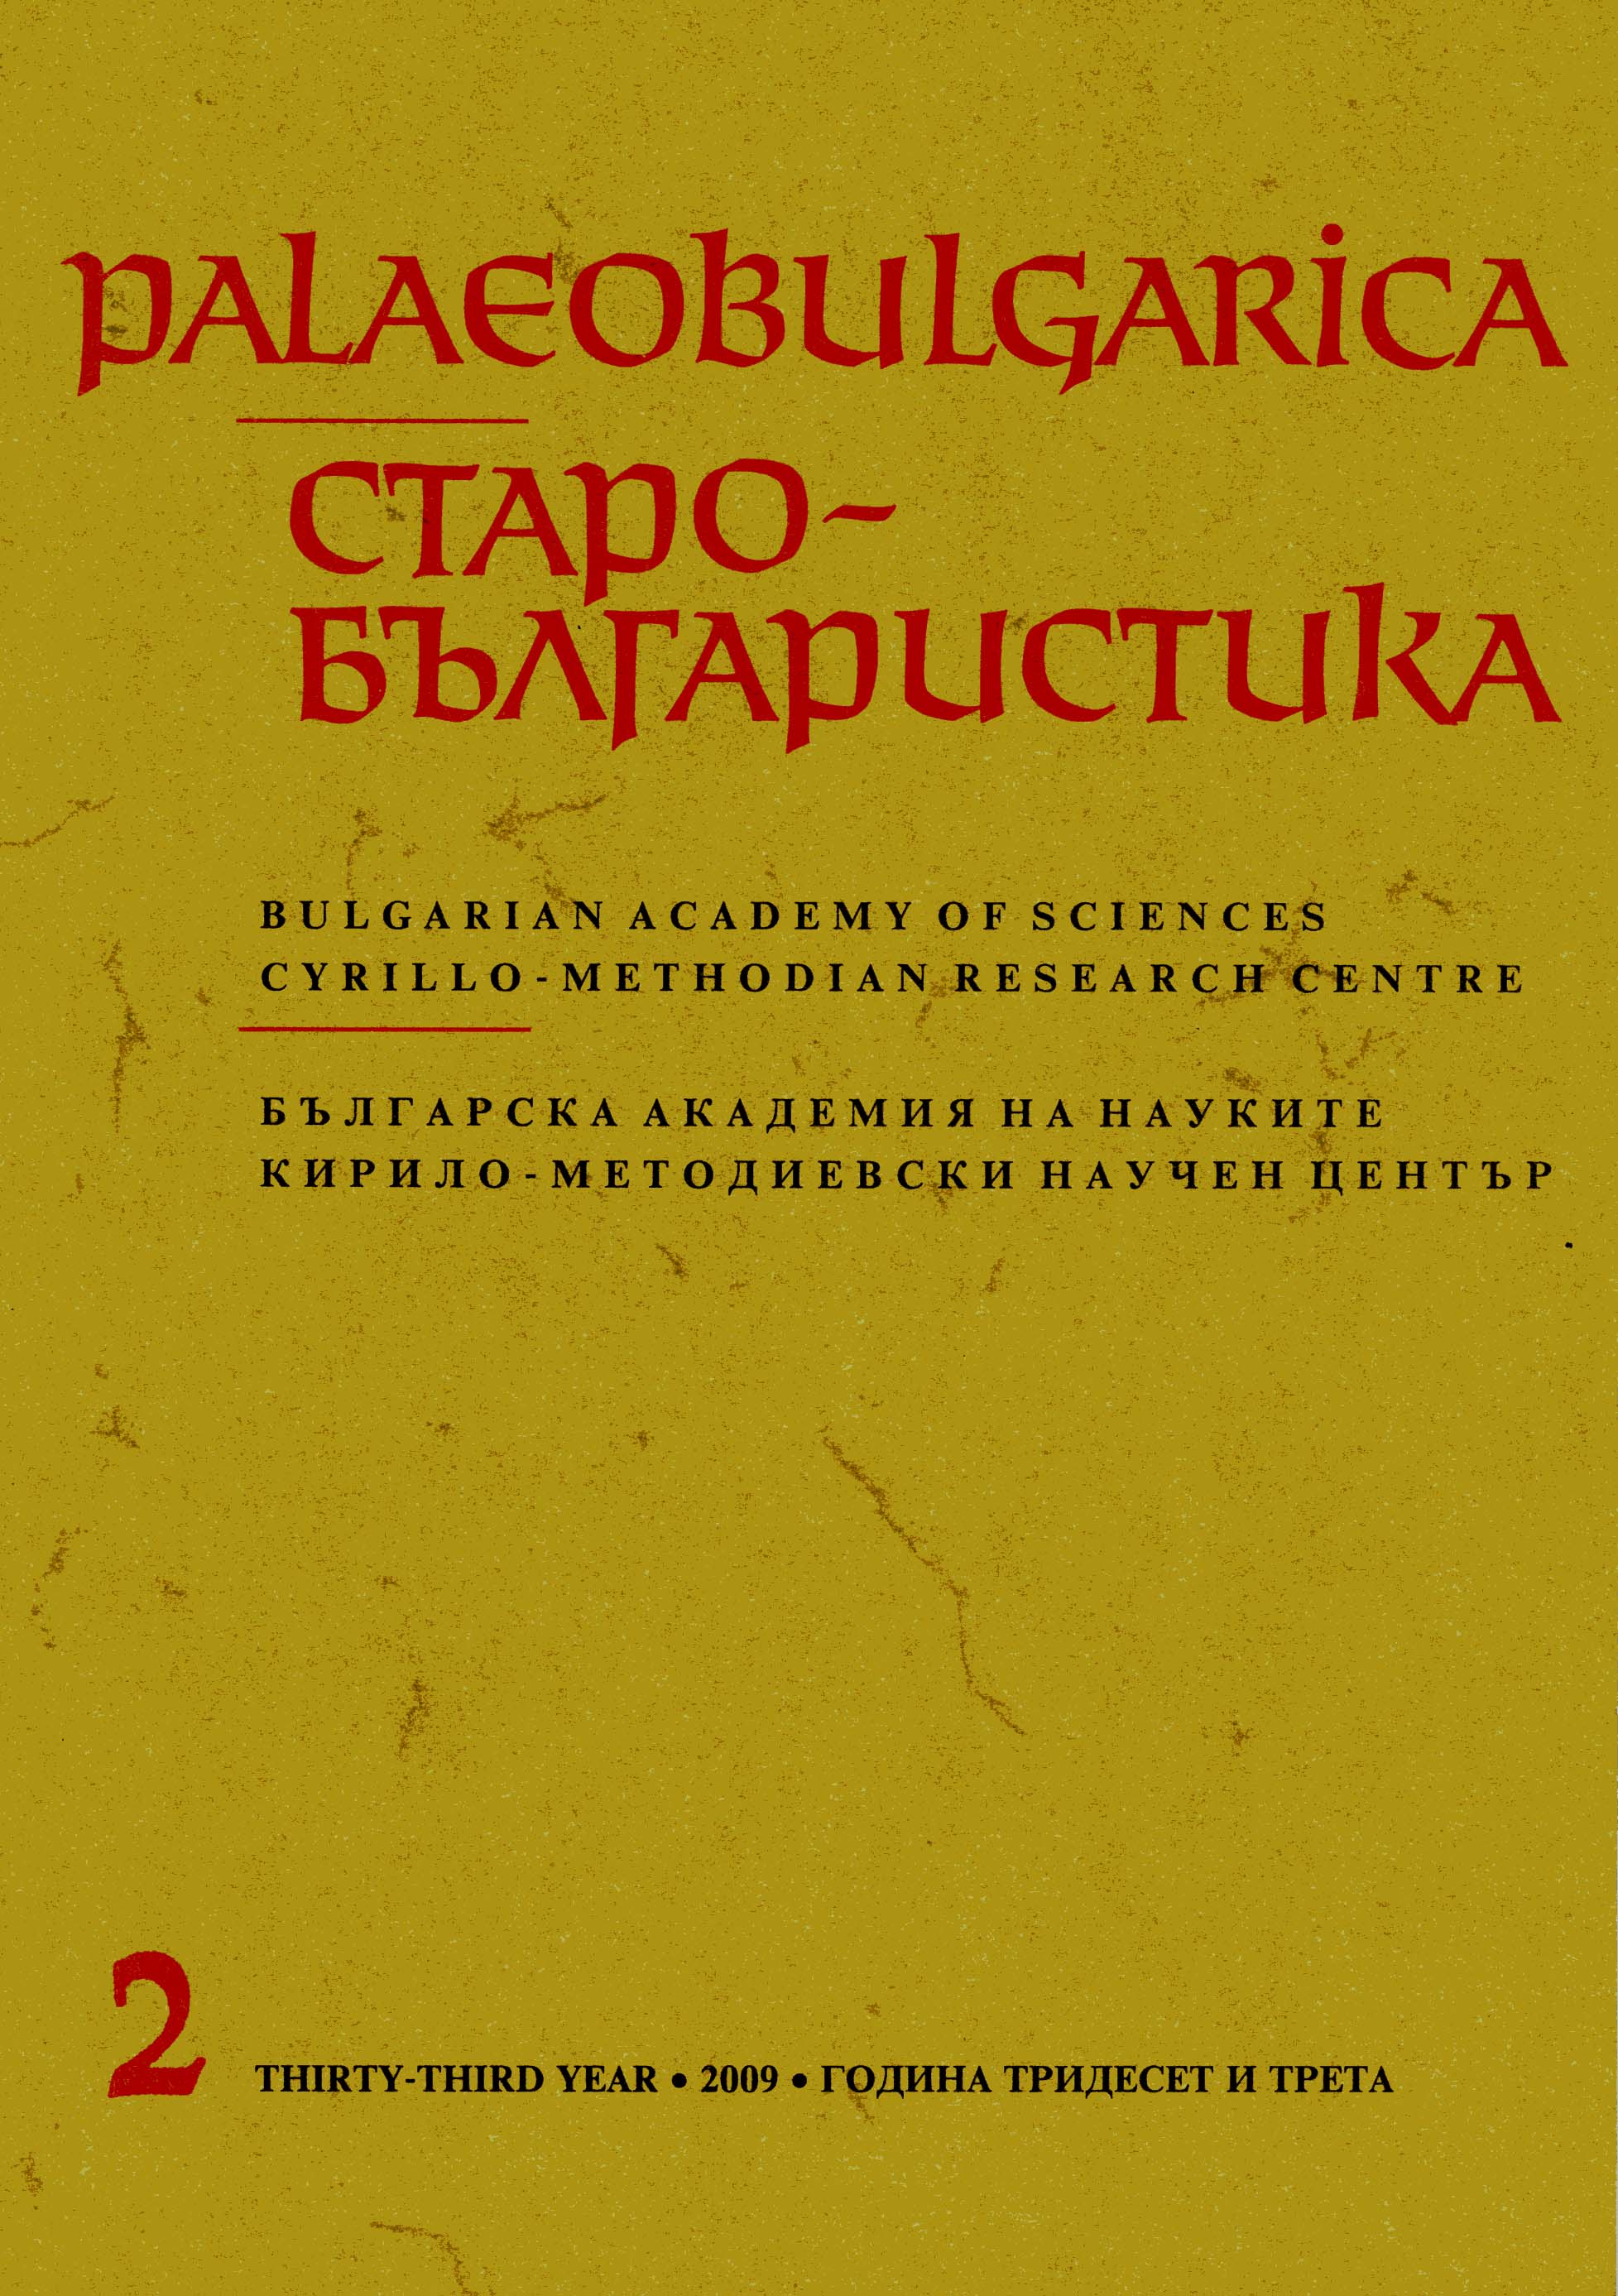 A Valuable Contribution to the Study of the Material and Spiritual Culture of the First Bulgarian Kingdom Cover Image